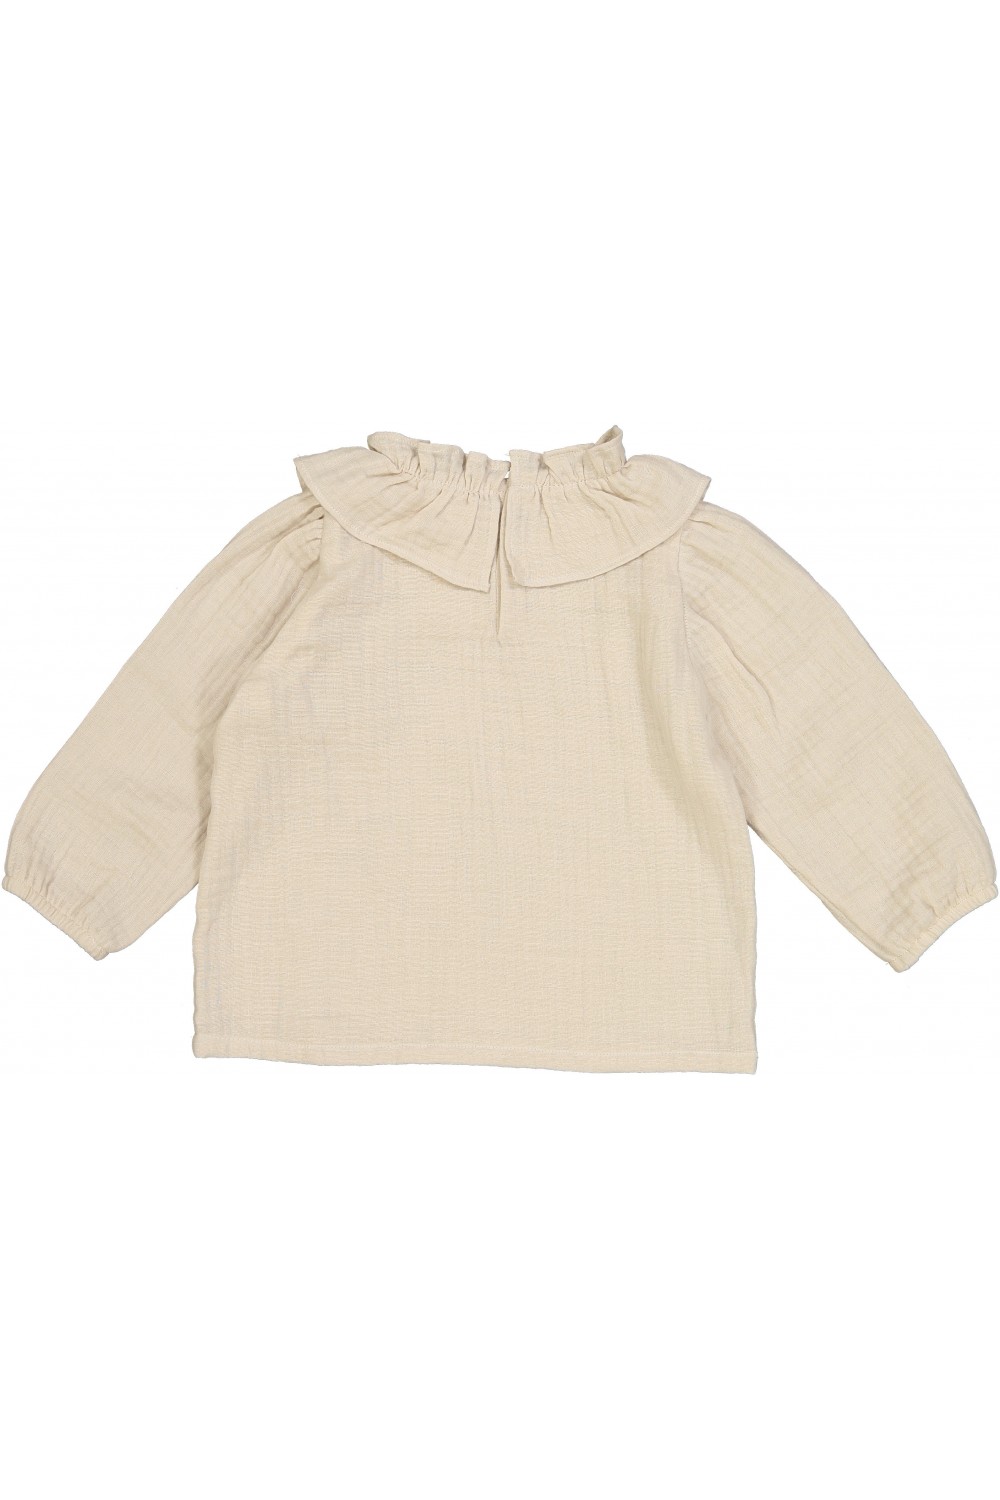 blouse Pirouette natural